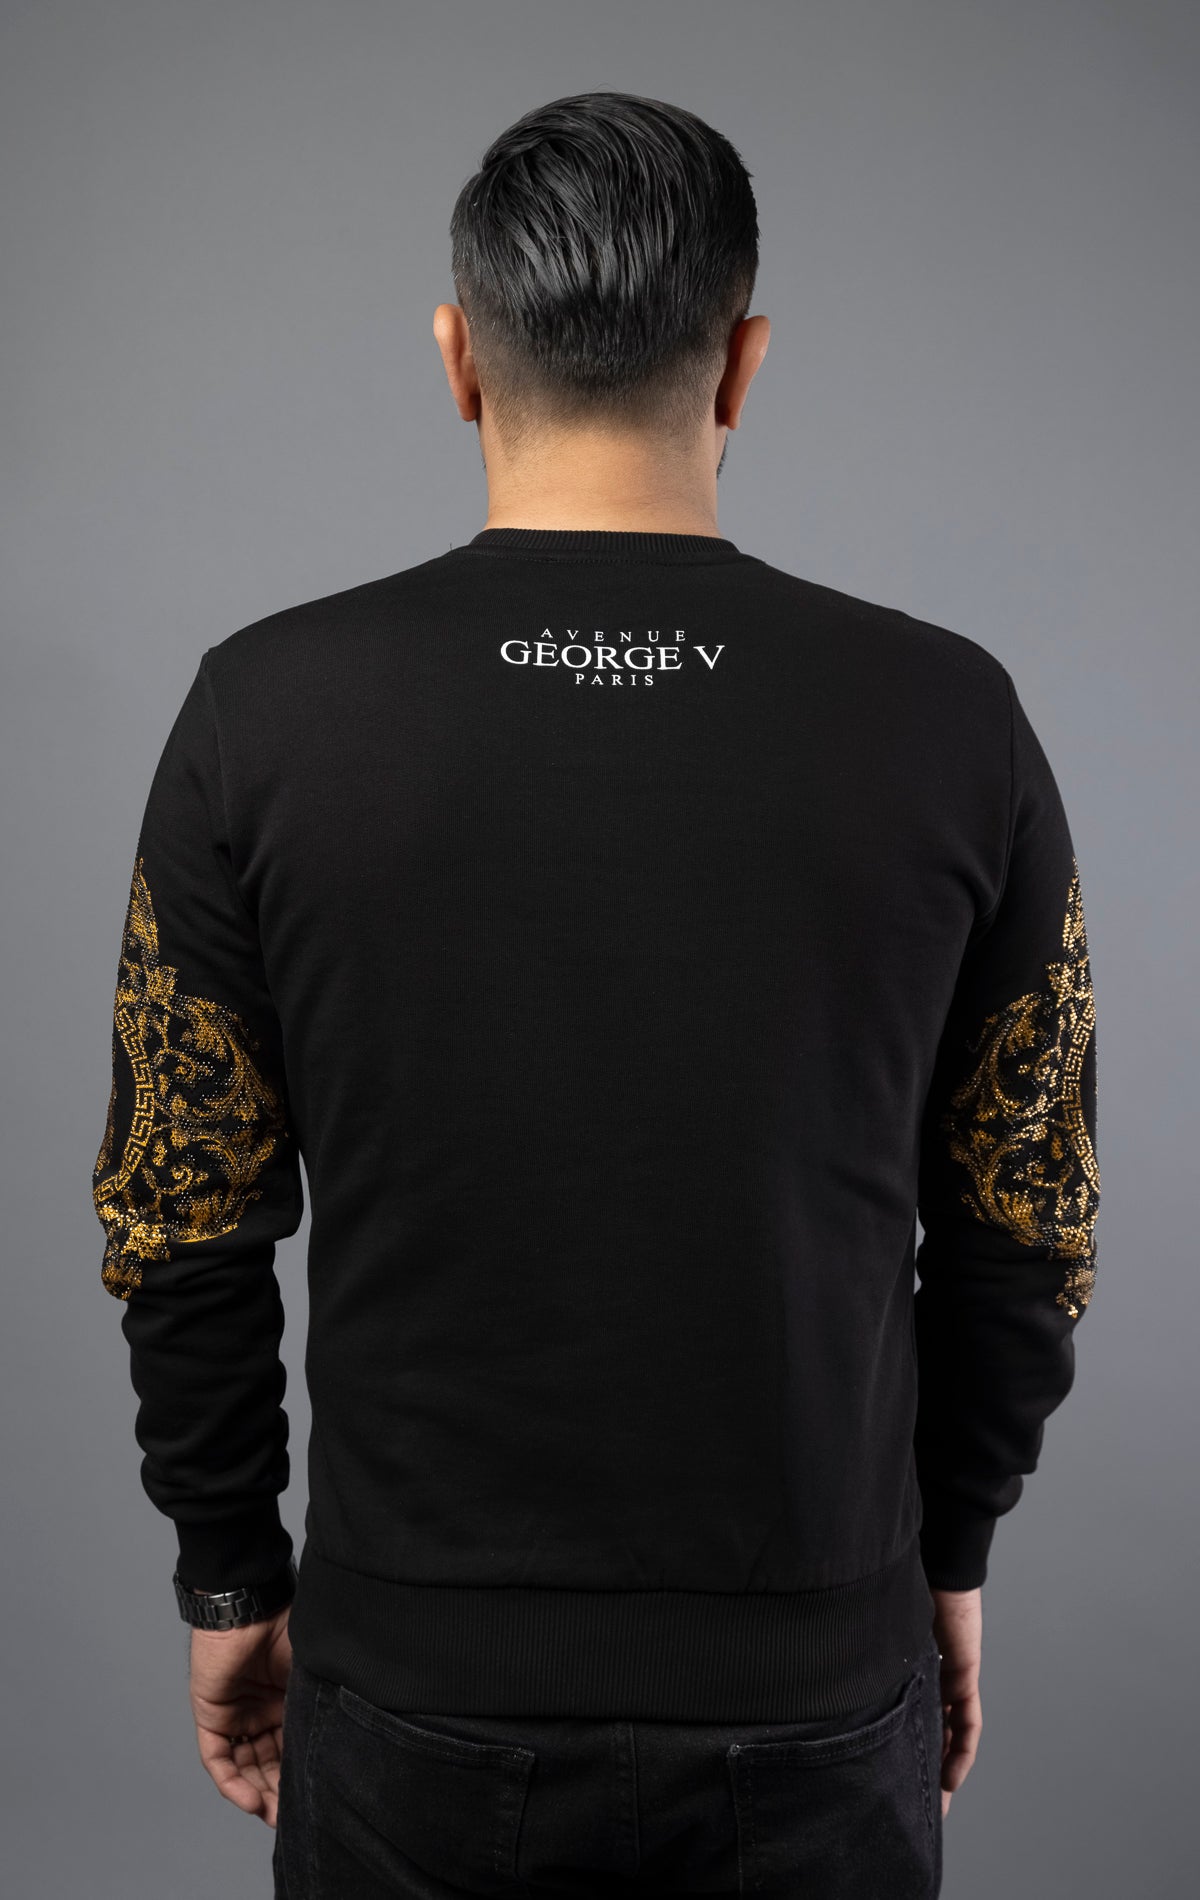 Black Soft and comfortable GV sweater with round-neck, long sleeves, and a Lion pin. The gold sleeves add a touch of elegance, making it suitable for daily wear. Made with soft cotton for ultimate comfort.